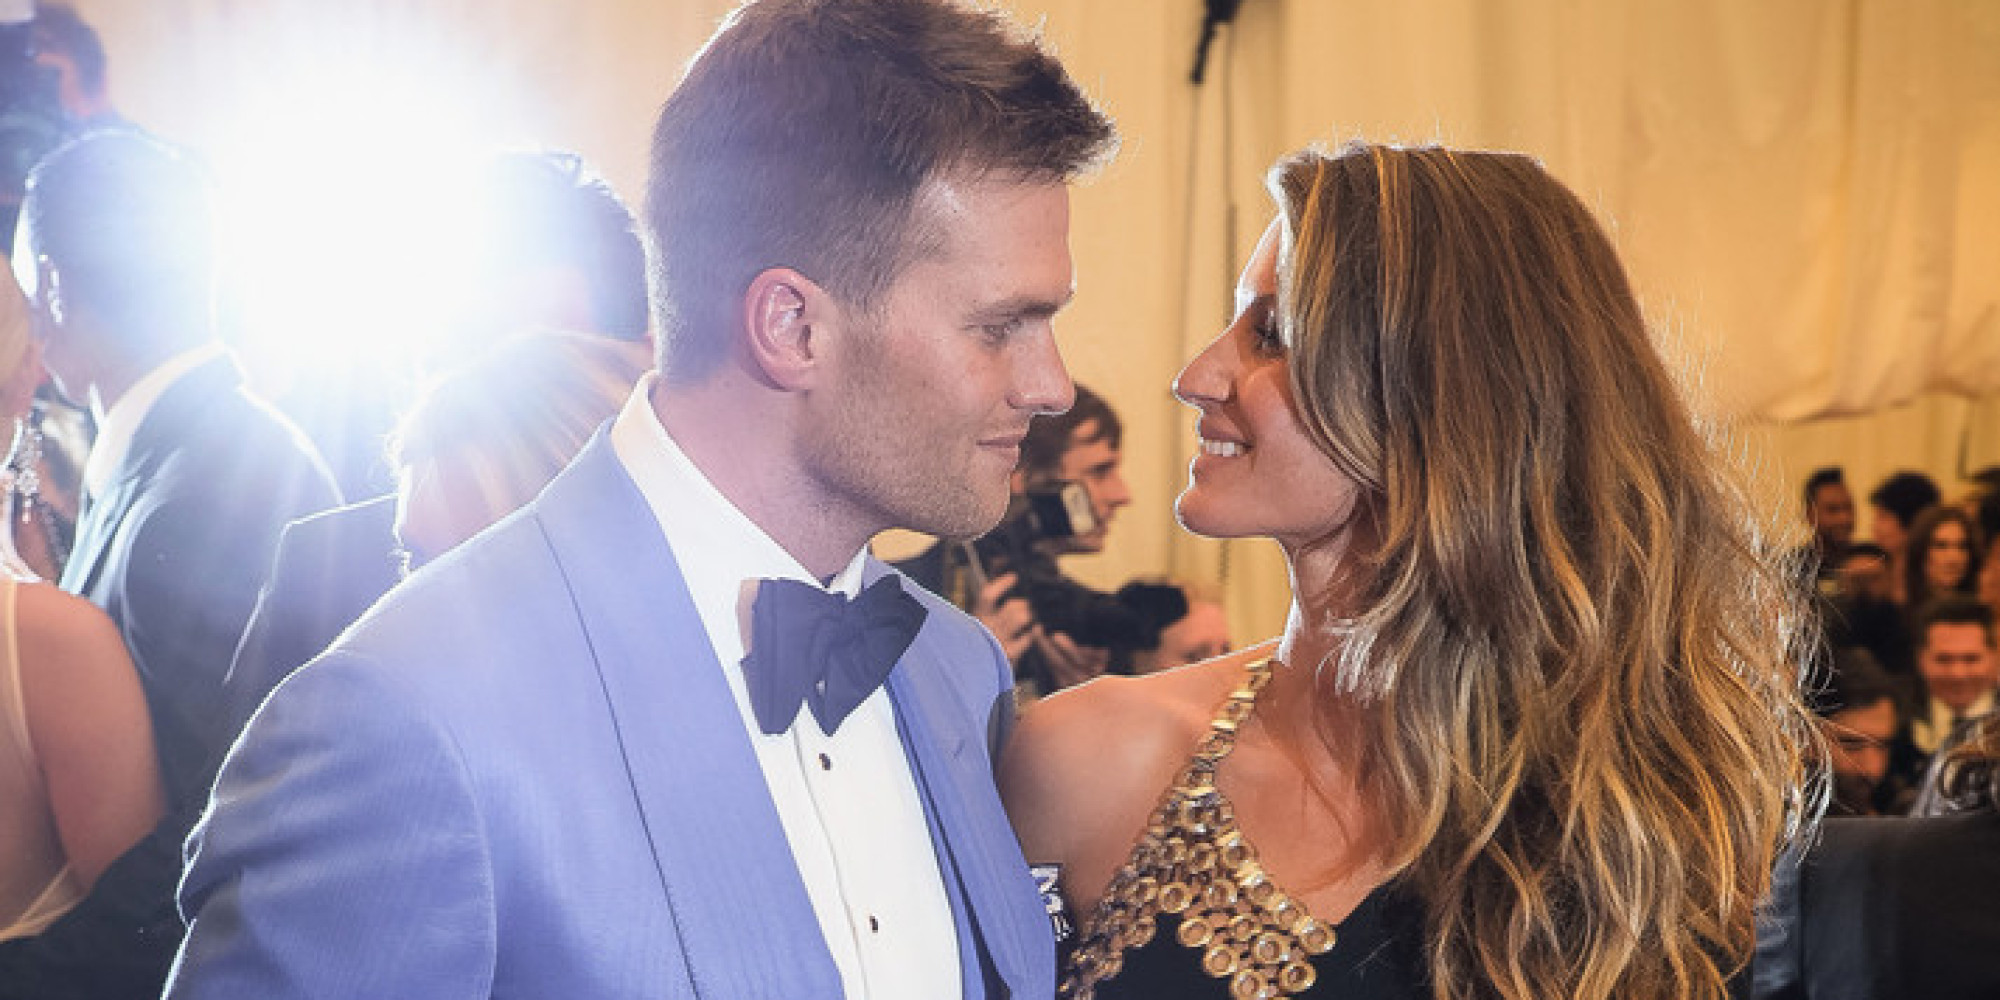 Gisele Bundchen And Tom Bradys Wedding Anniversary Photo Couldnt Be Cuter Huffpost 1074